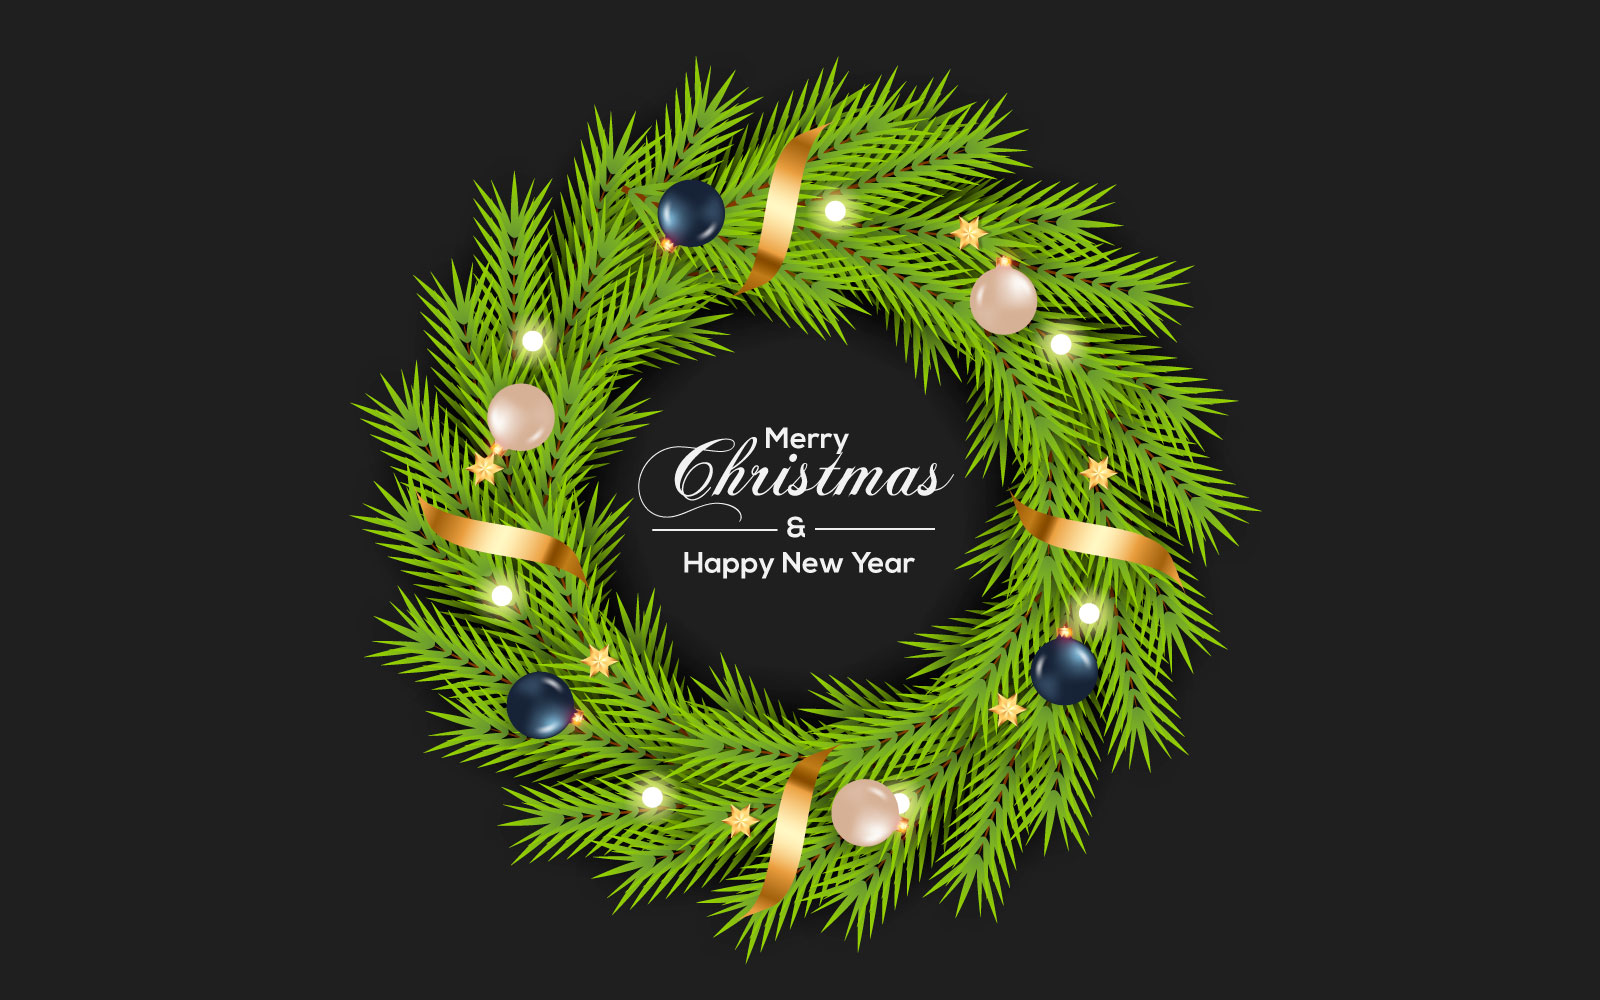 merry Christmas wreath vector design merry christmas text with garland element